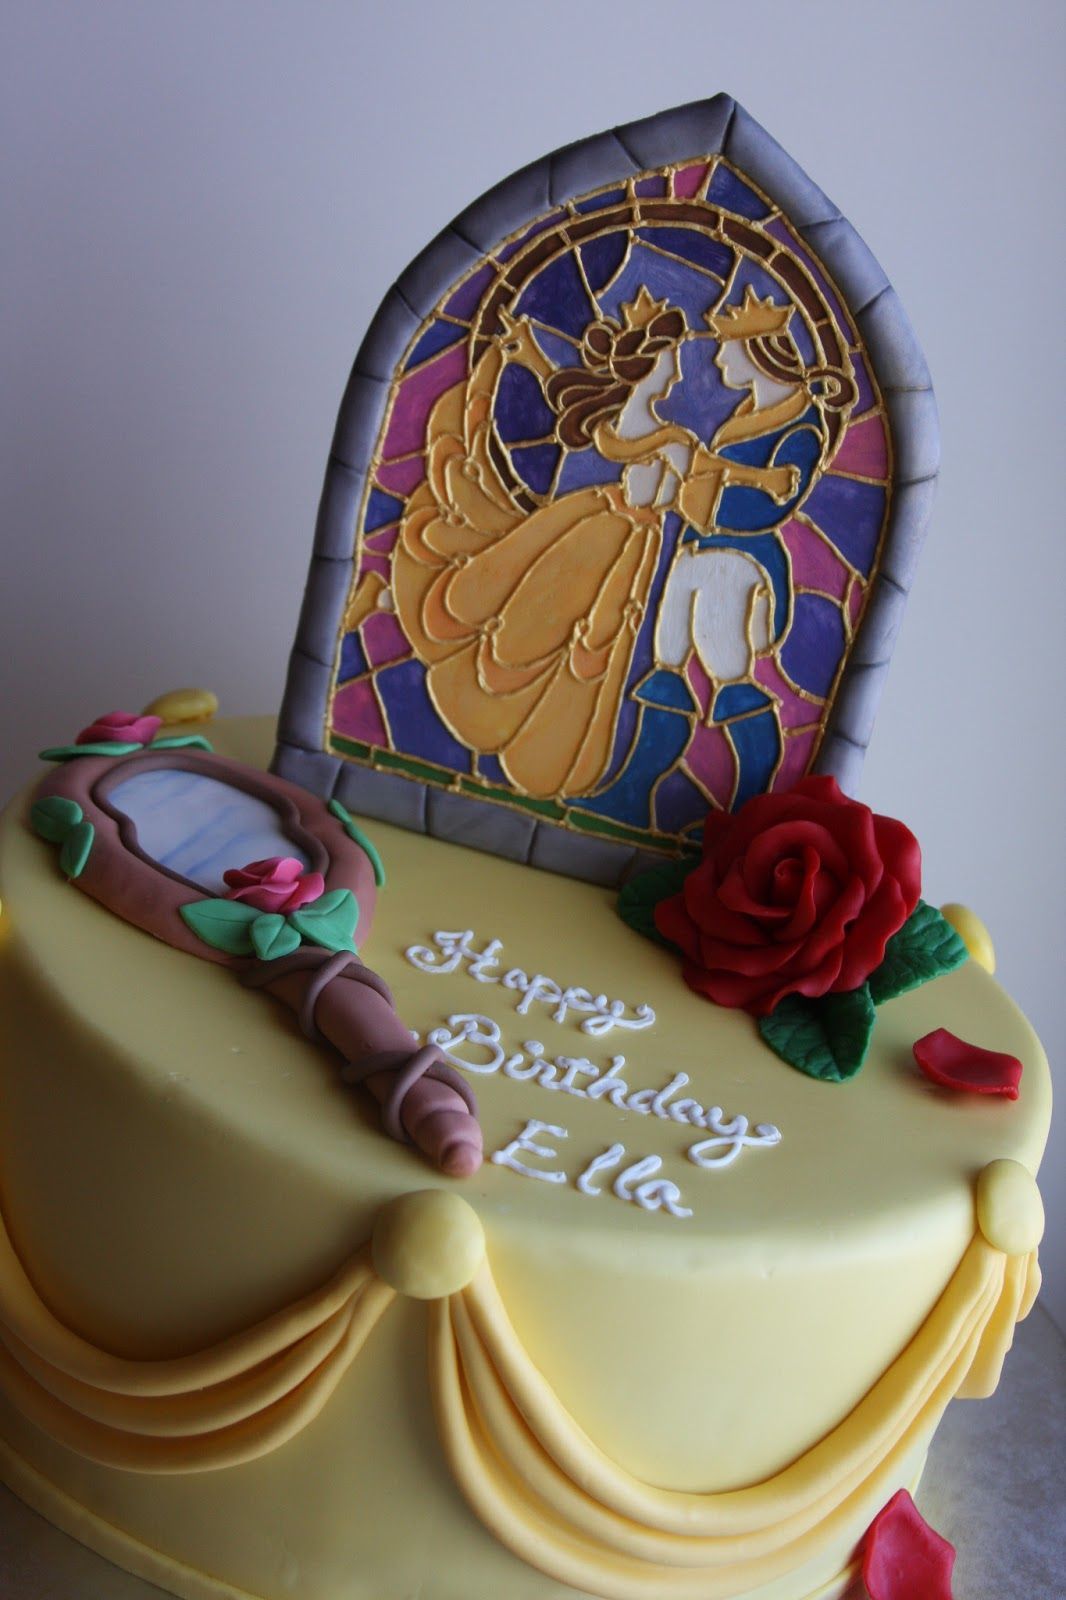 Beauty and the Beast cake. @Laura Bankin Im putting in my cake order for my next